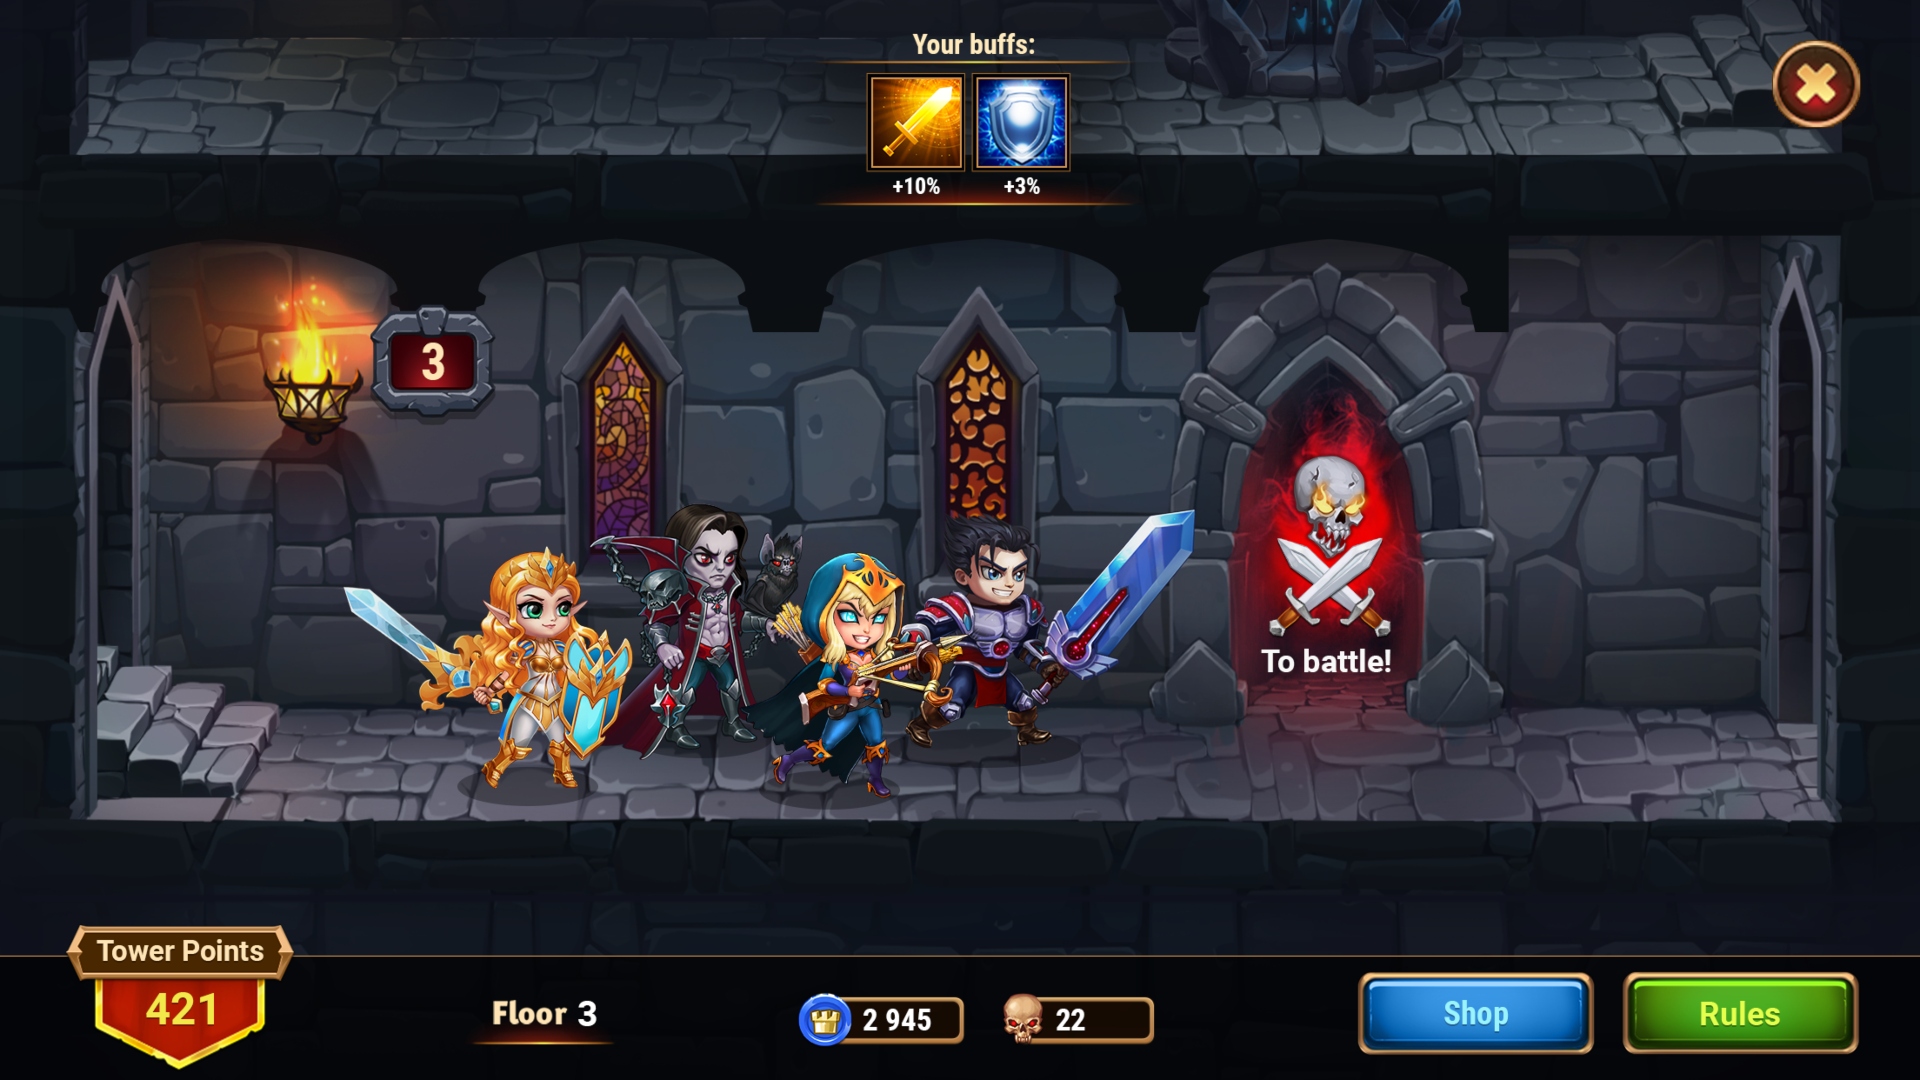 10 Best Idle Games On PC